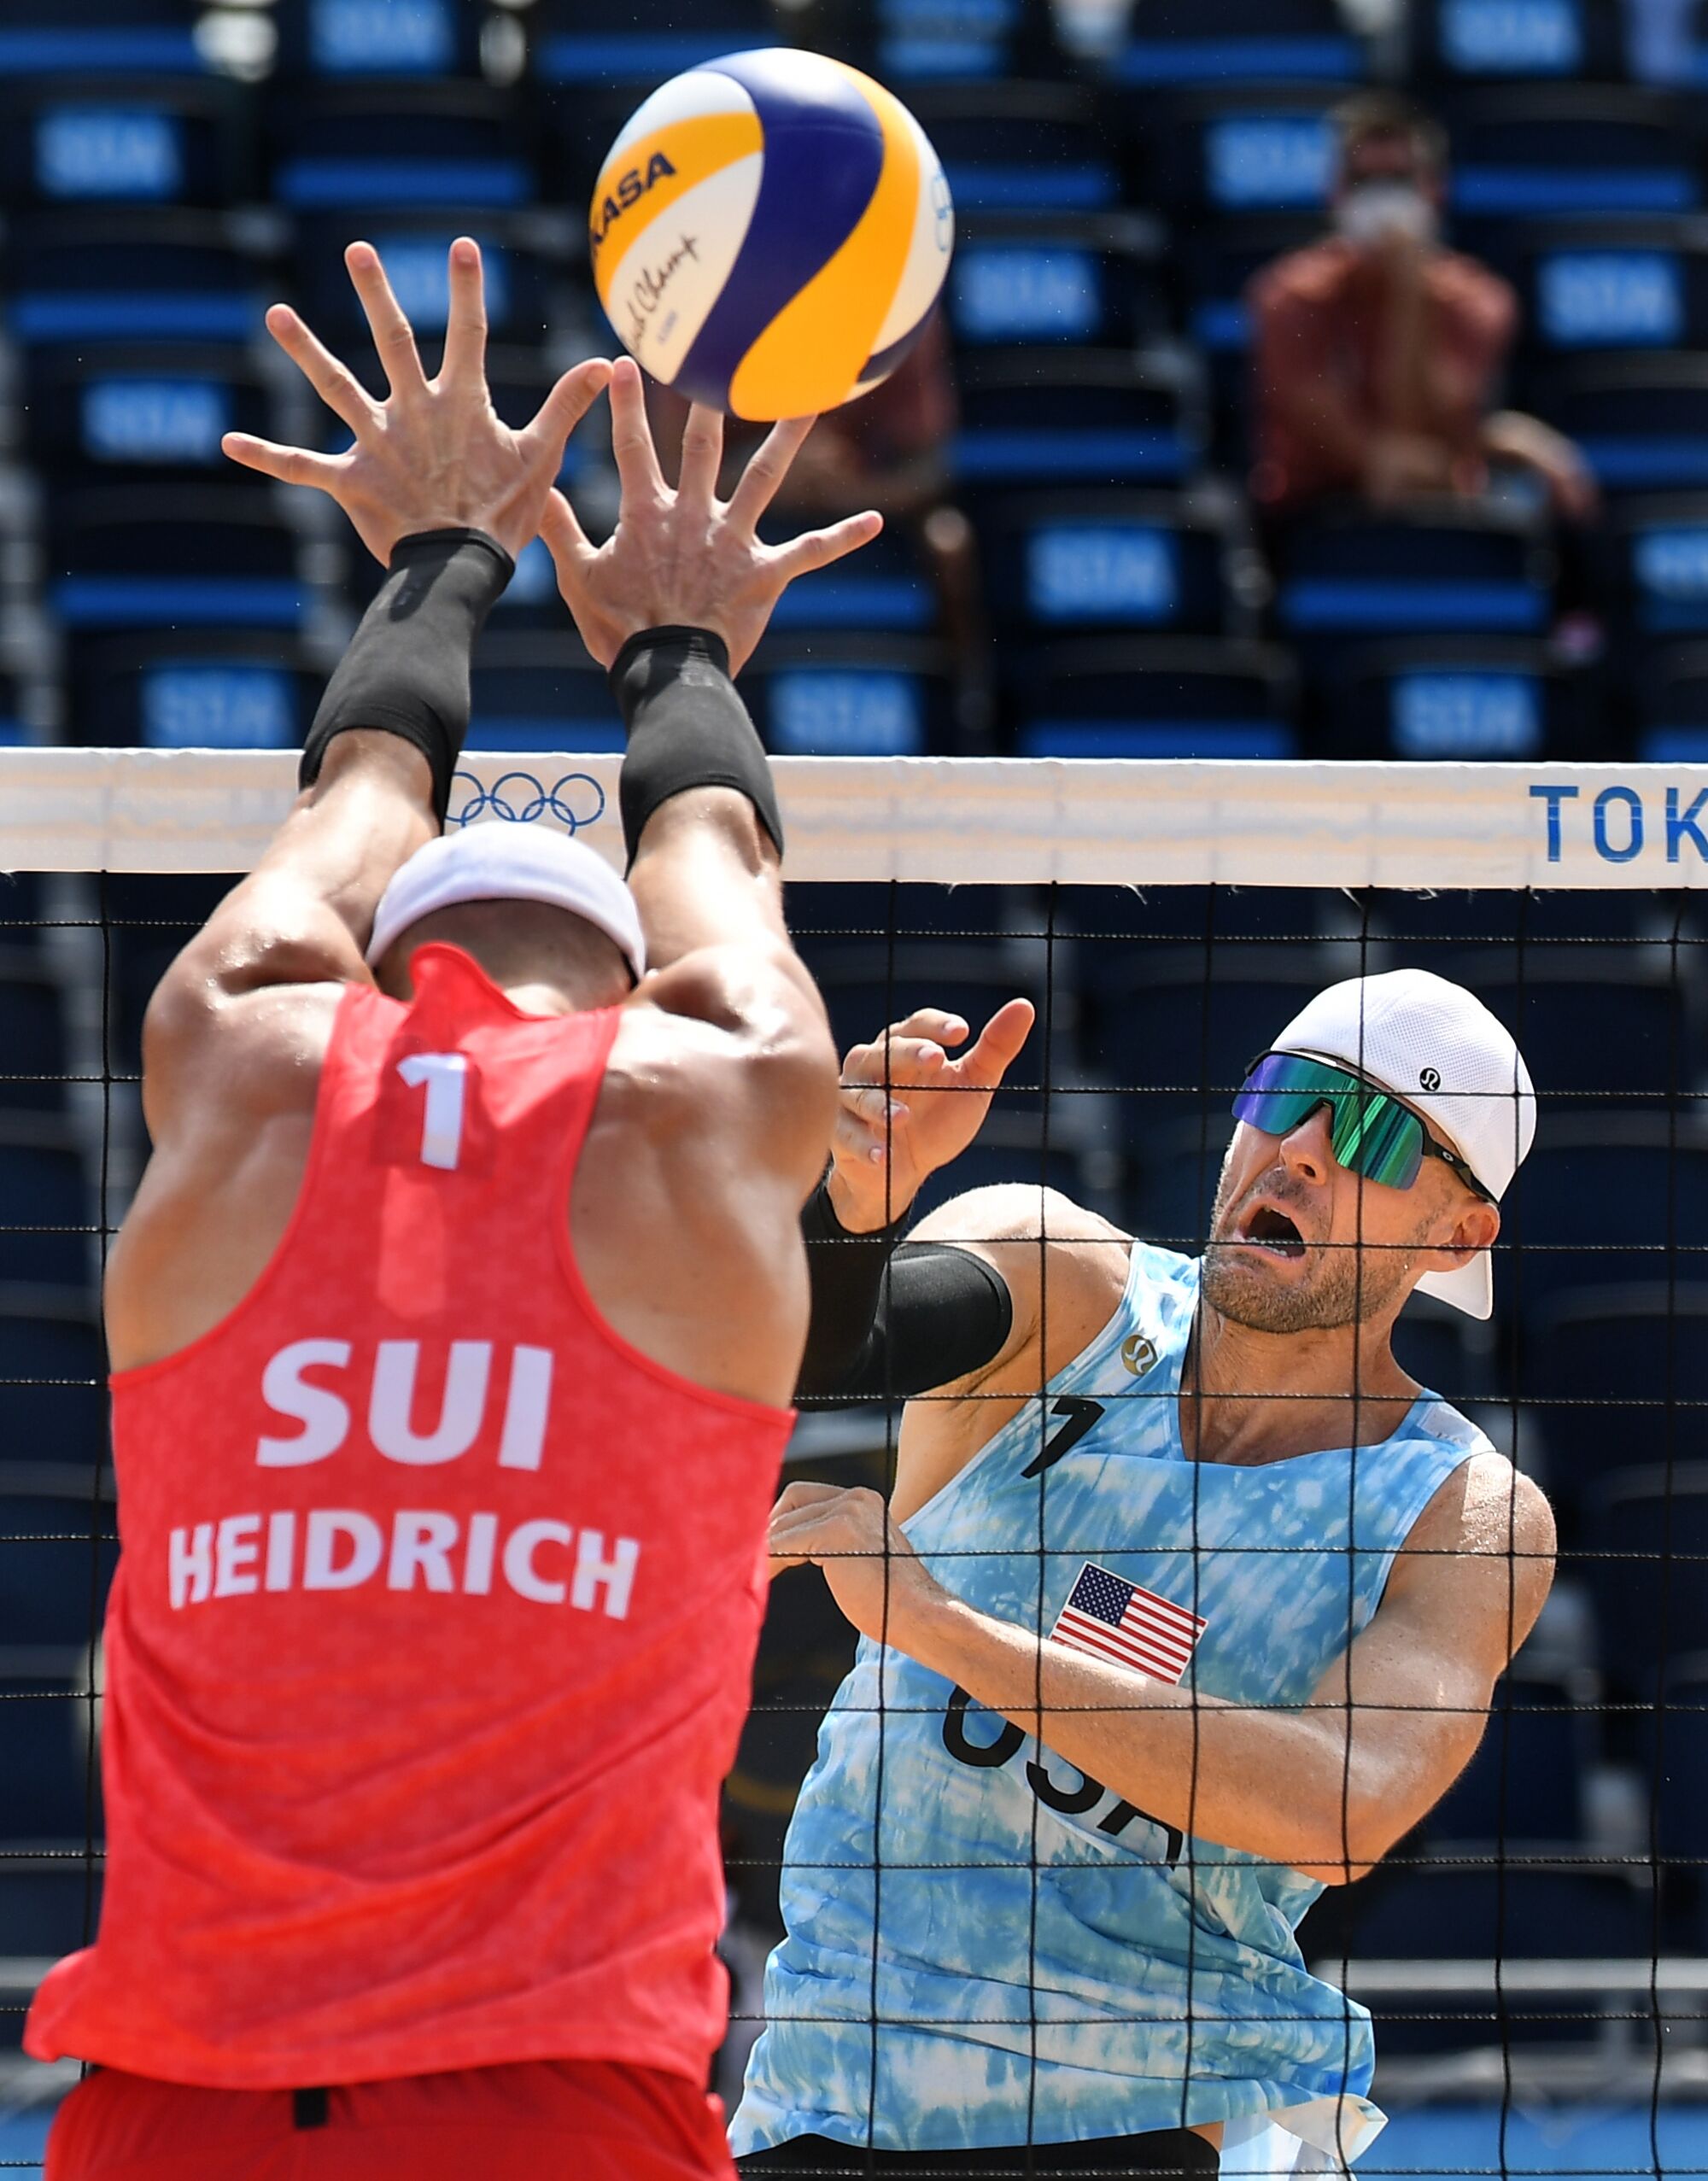 Two men leap at the net.